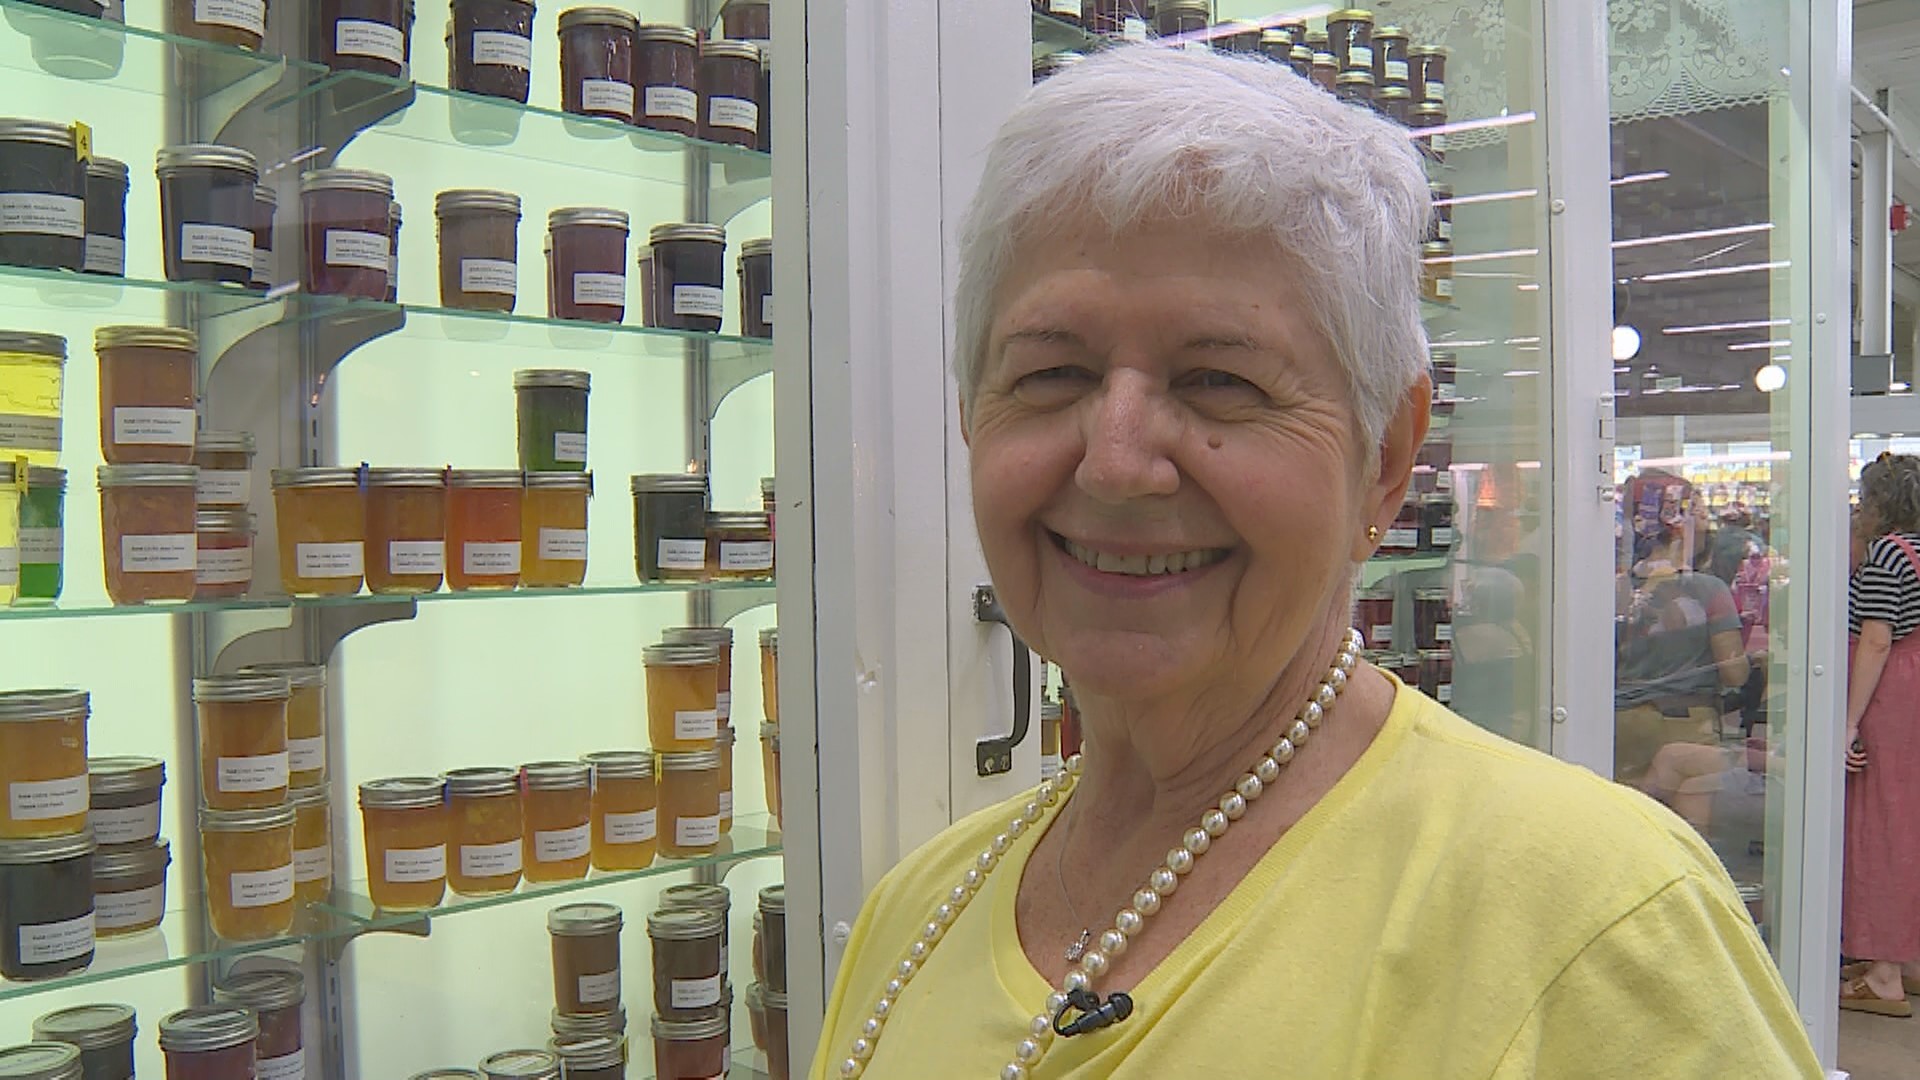 Barb Schaller from Burnsville won this year's "Prestigious Processor of the Pantry" award. It's her 11th time winning the top prize in the canning competition.